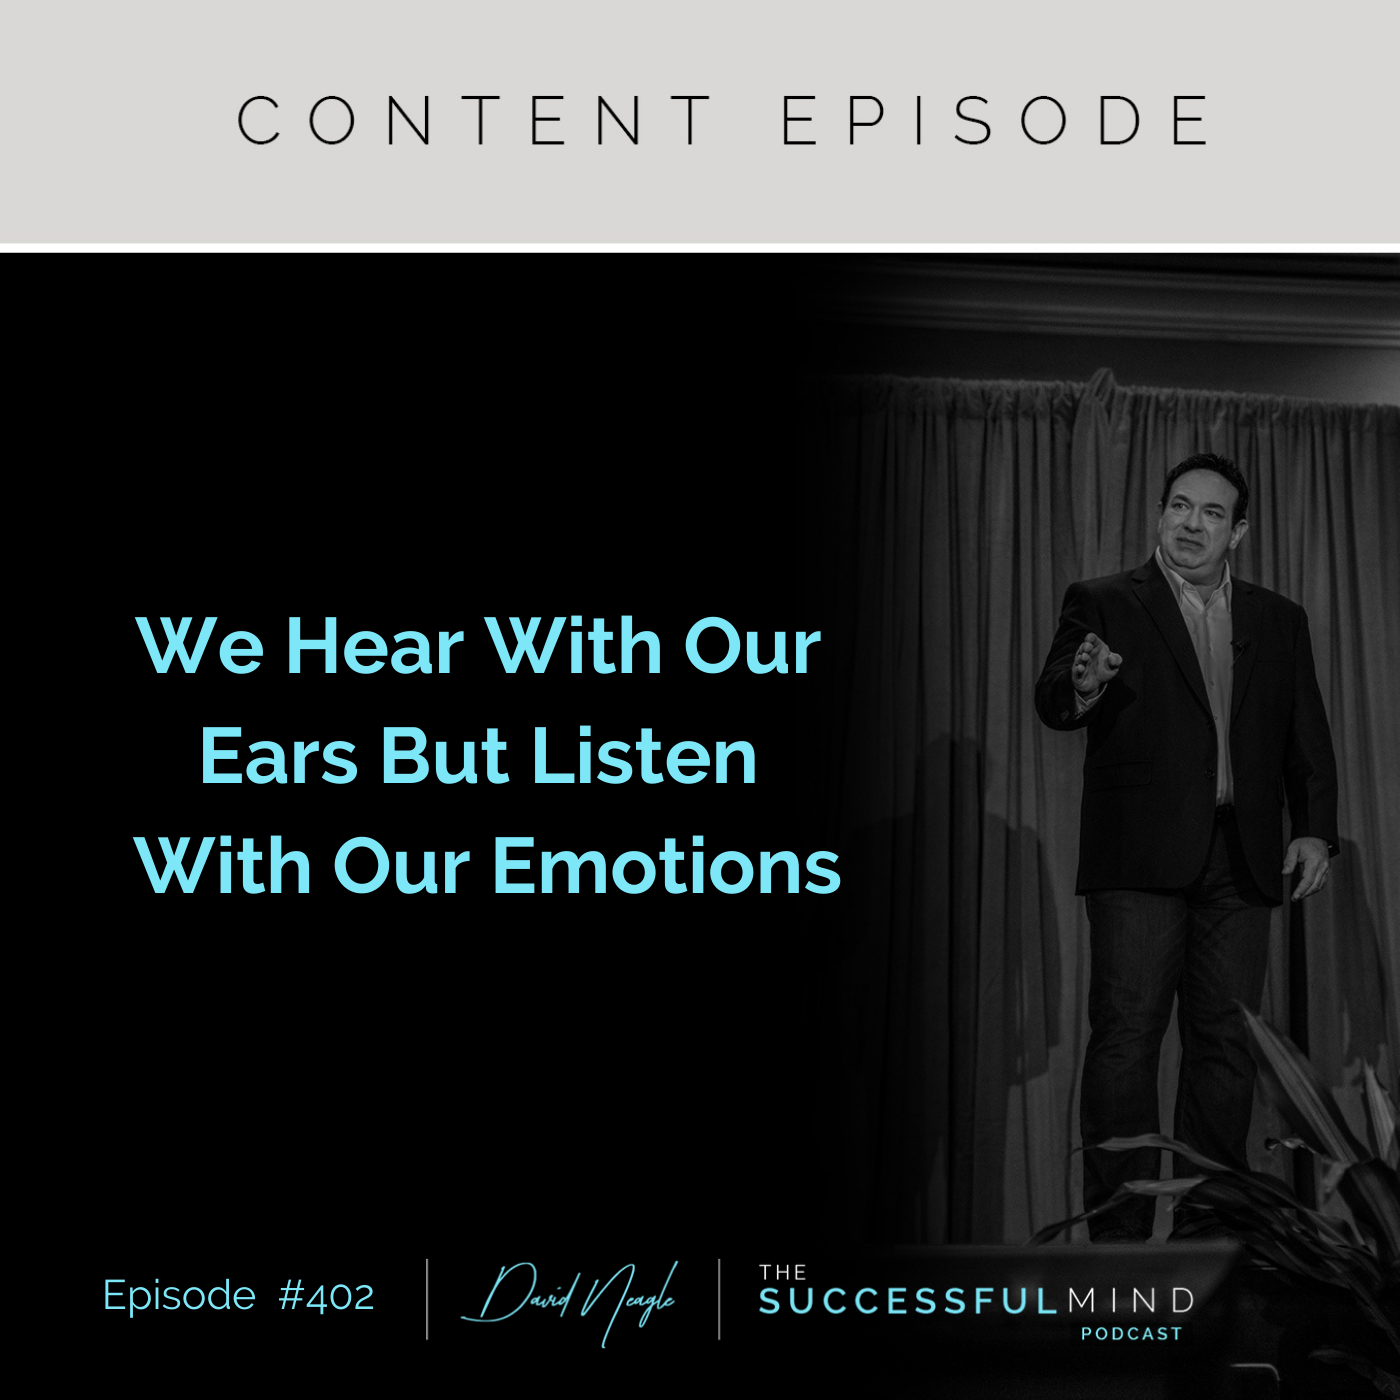 The Successful Mind Podcast - Episode 402 - We Hear With Our Ears But Listen With Our Emotions